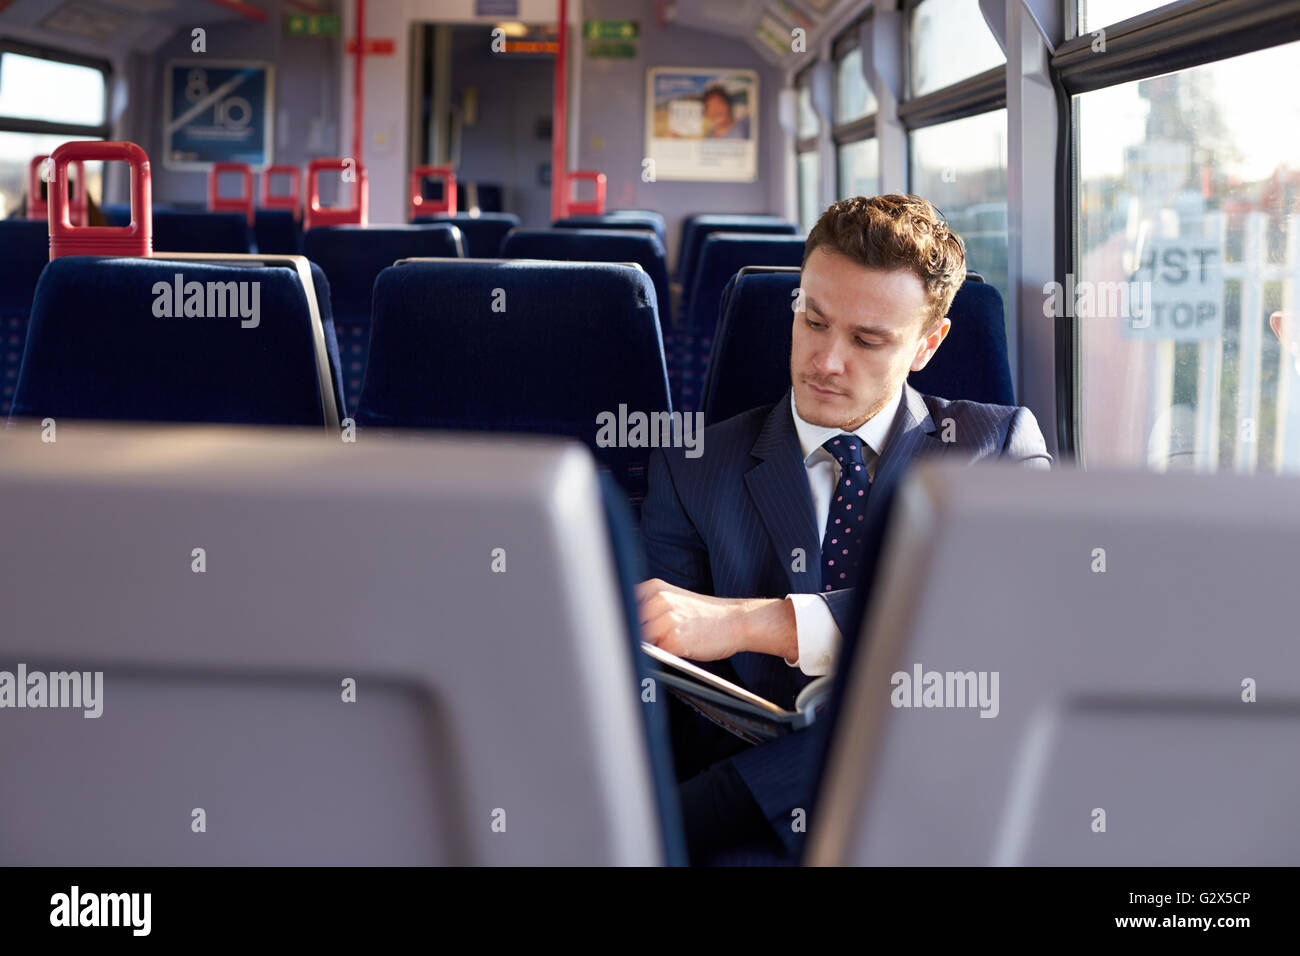 Businessman Commuting To Work Reading Newspaper On Train Stock Photo